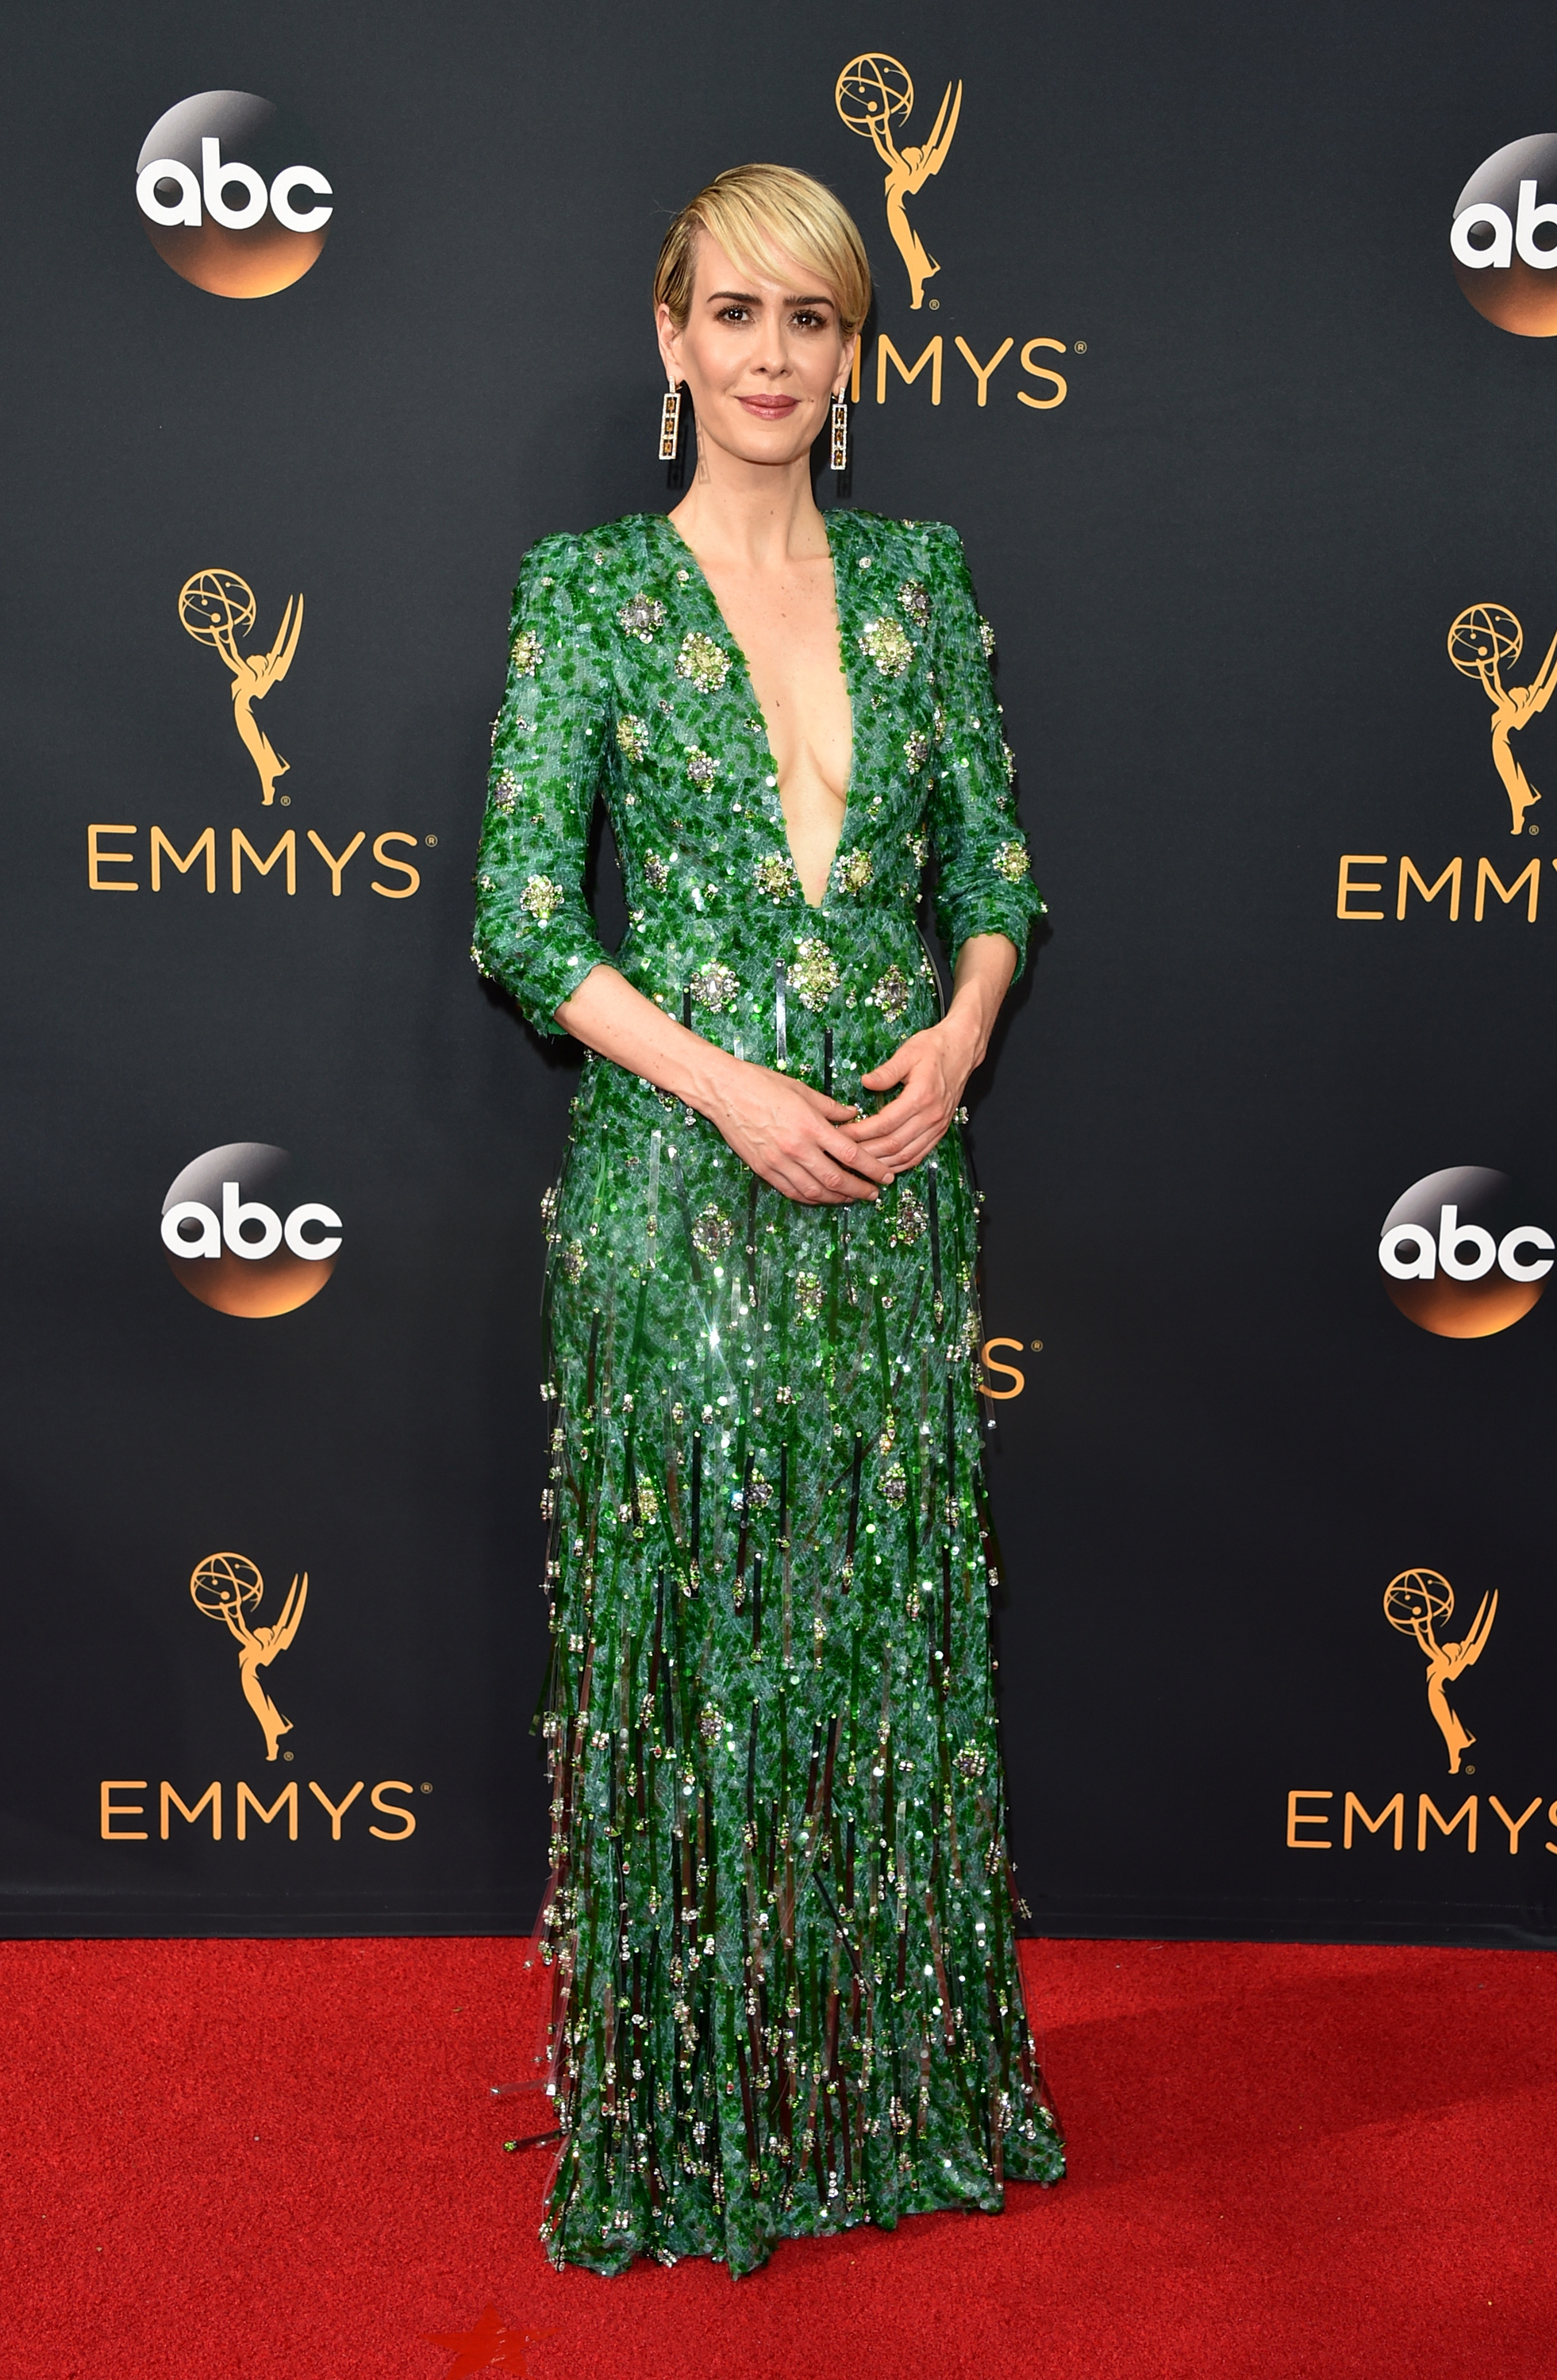 Sarah Paulson arrives at the 68th Annual Primetime Emmy Awards at Microsoft Theater on September 18, 2016 in Los Angeles.